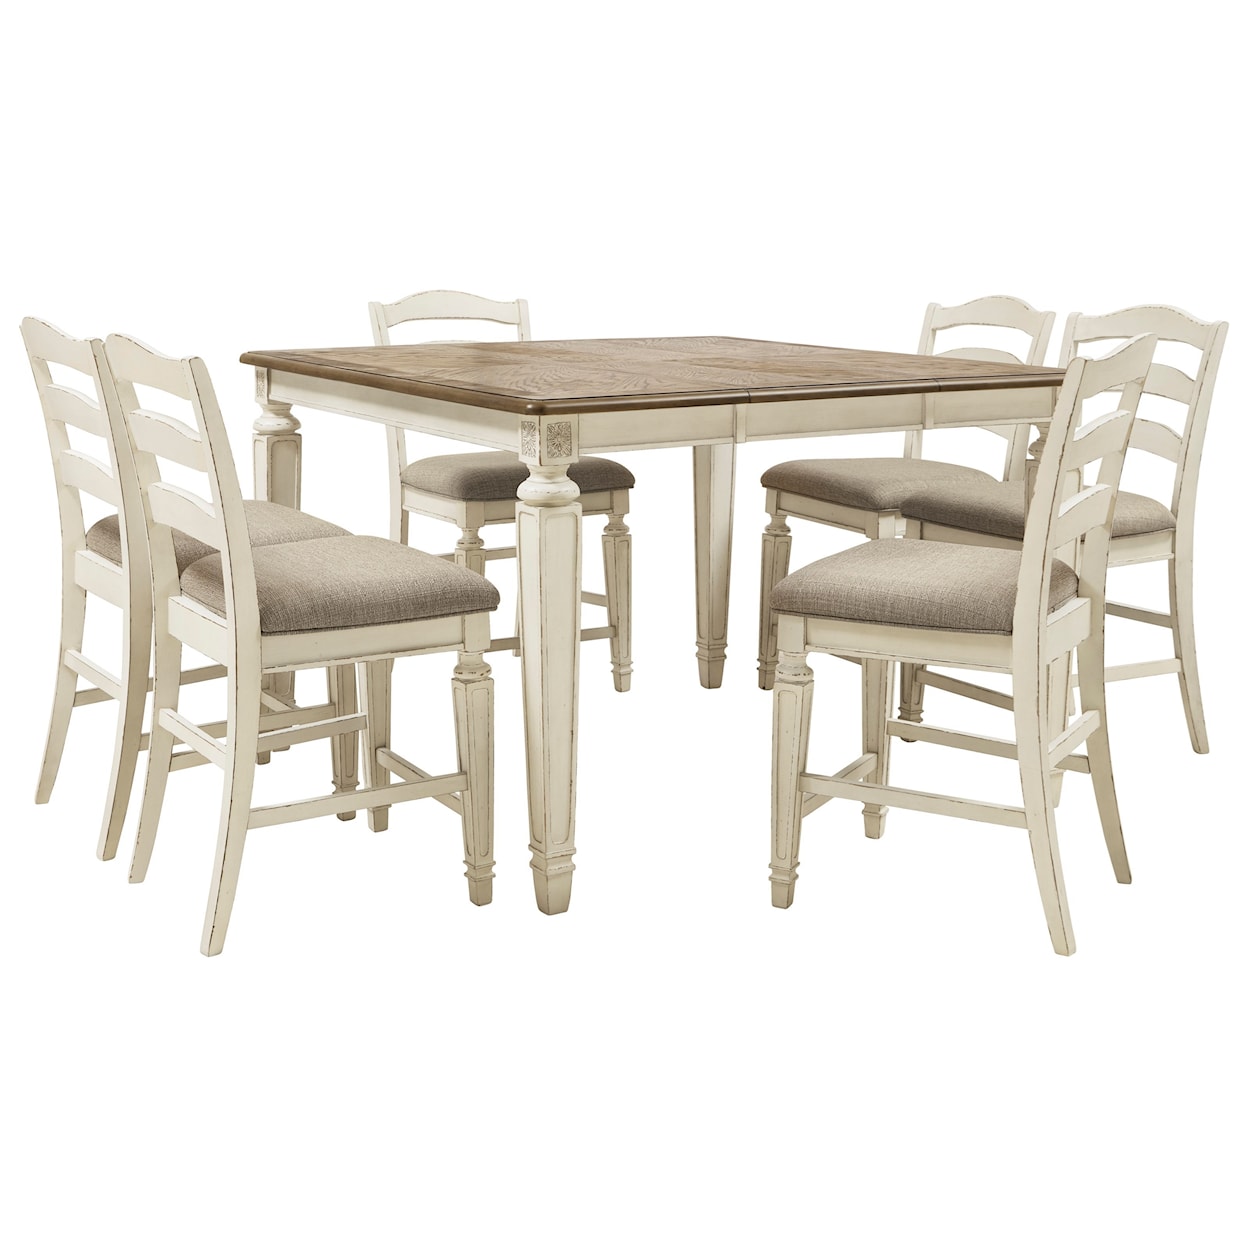 Signature Design by Ashley Realyn 7-Piece Counter Extension Table Set